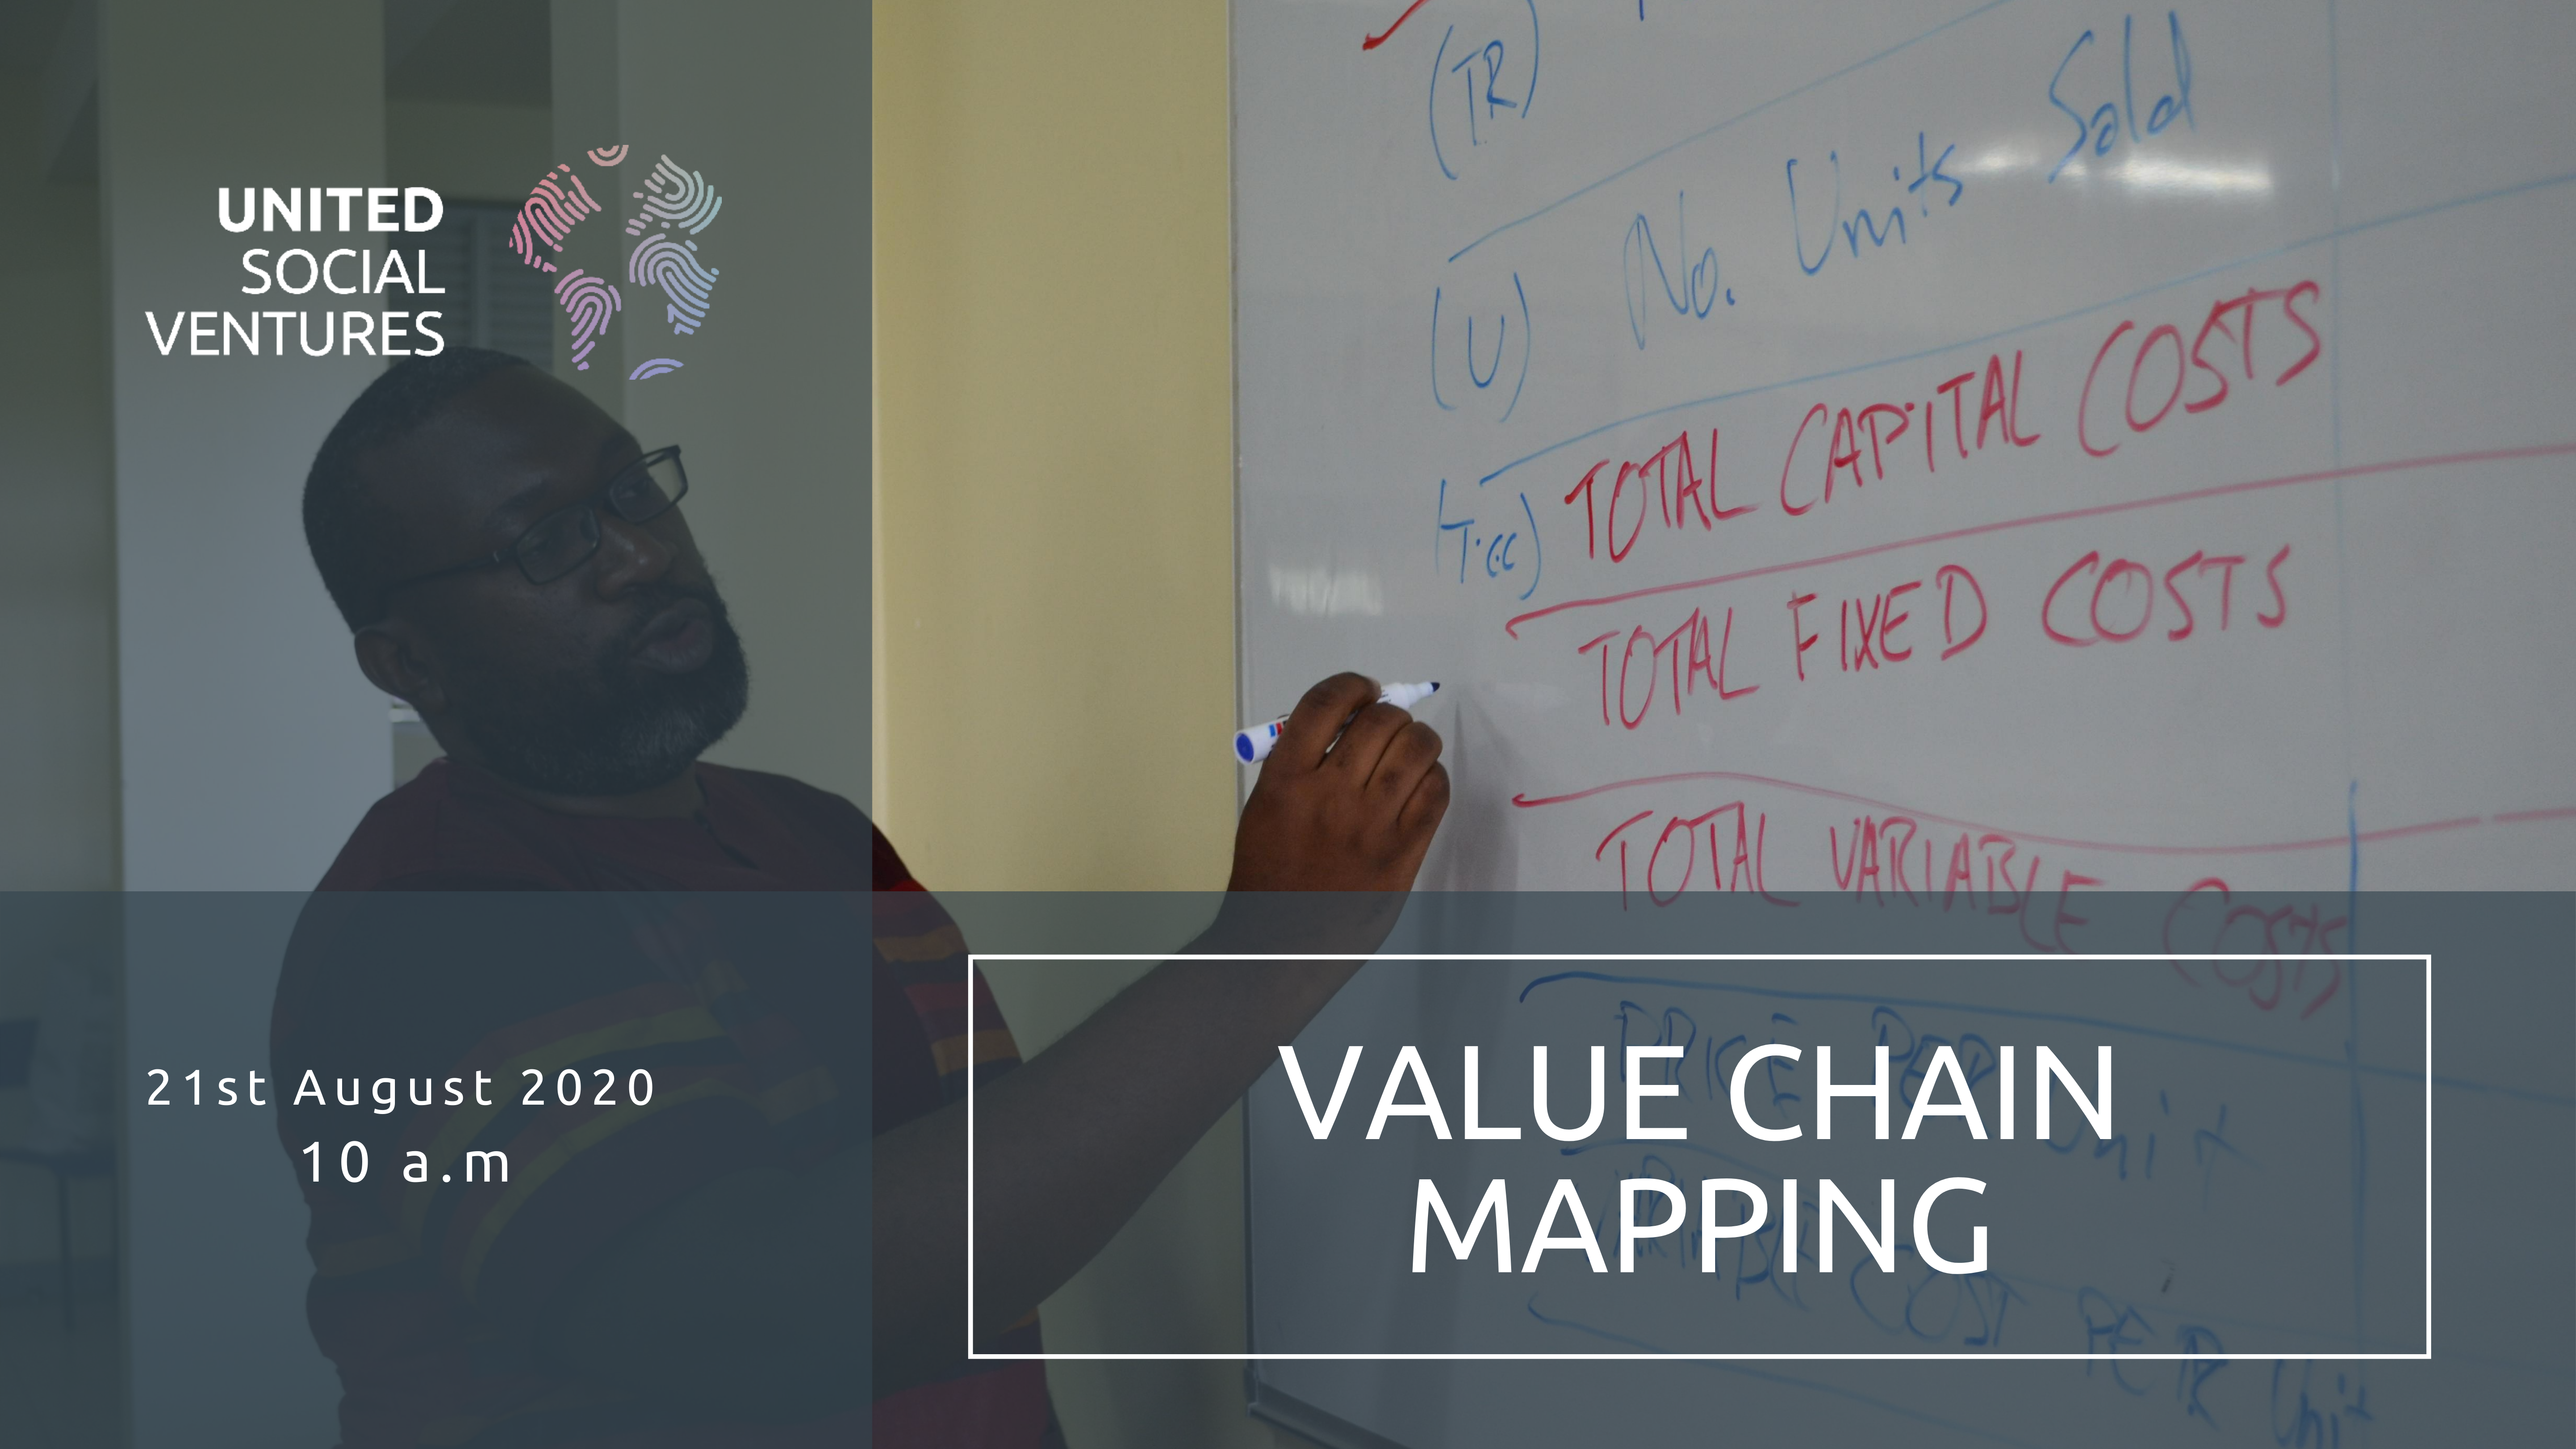 Value chain mapping